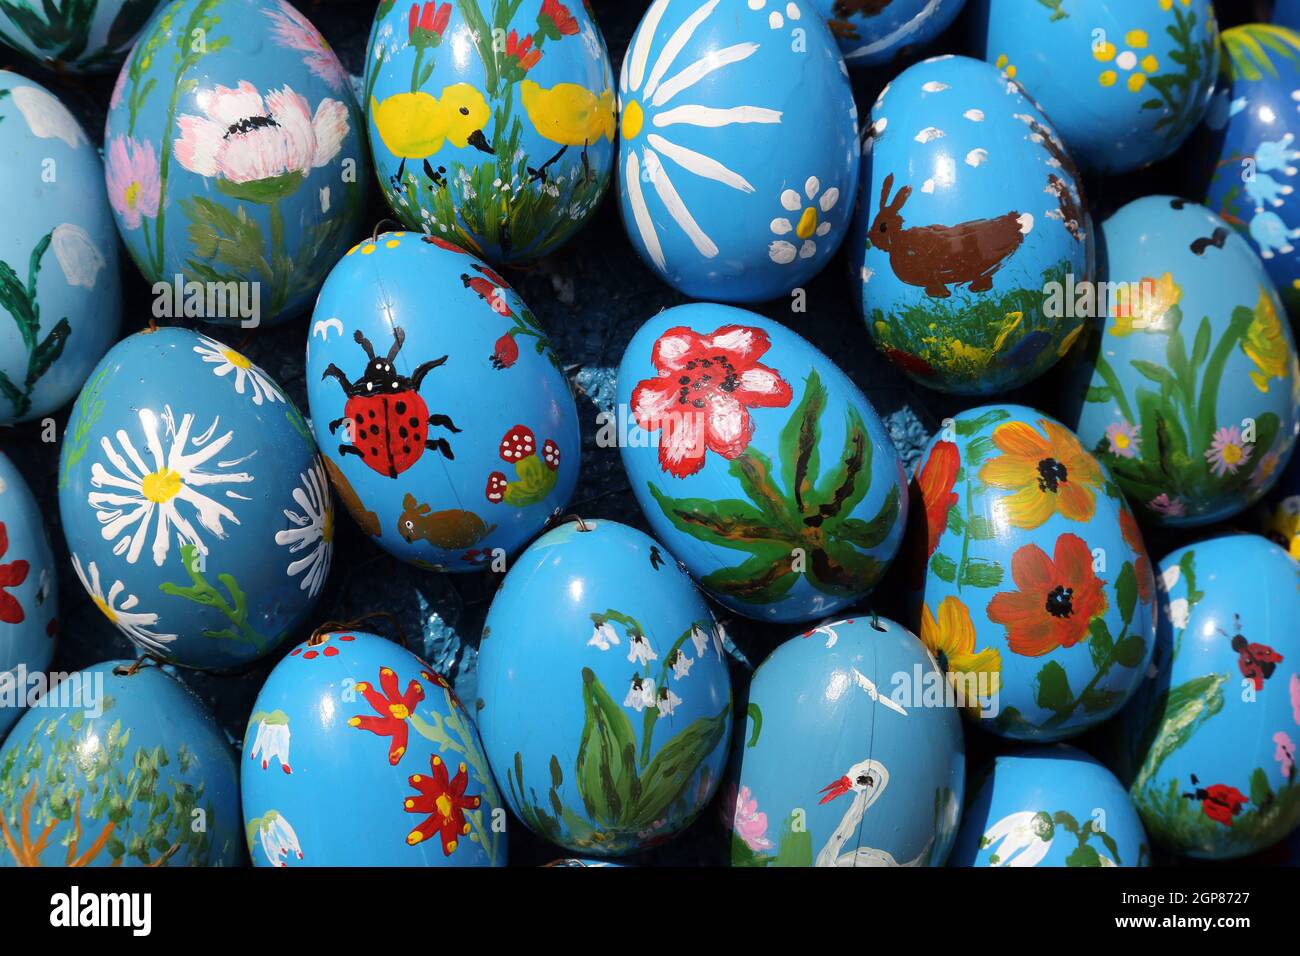 Easter eggs exposed in front of the parish church of St. Stephen in Wasseralfingen, Germany Stock Photo